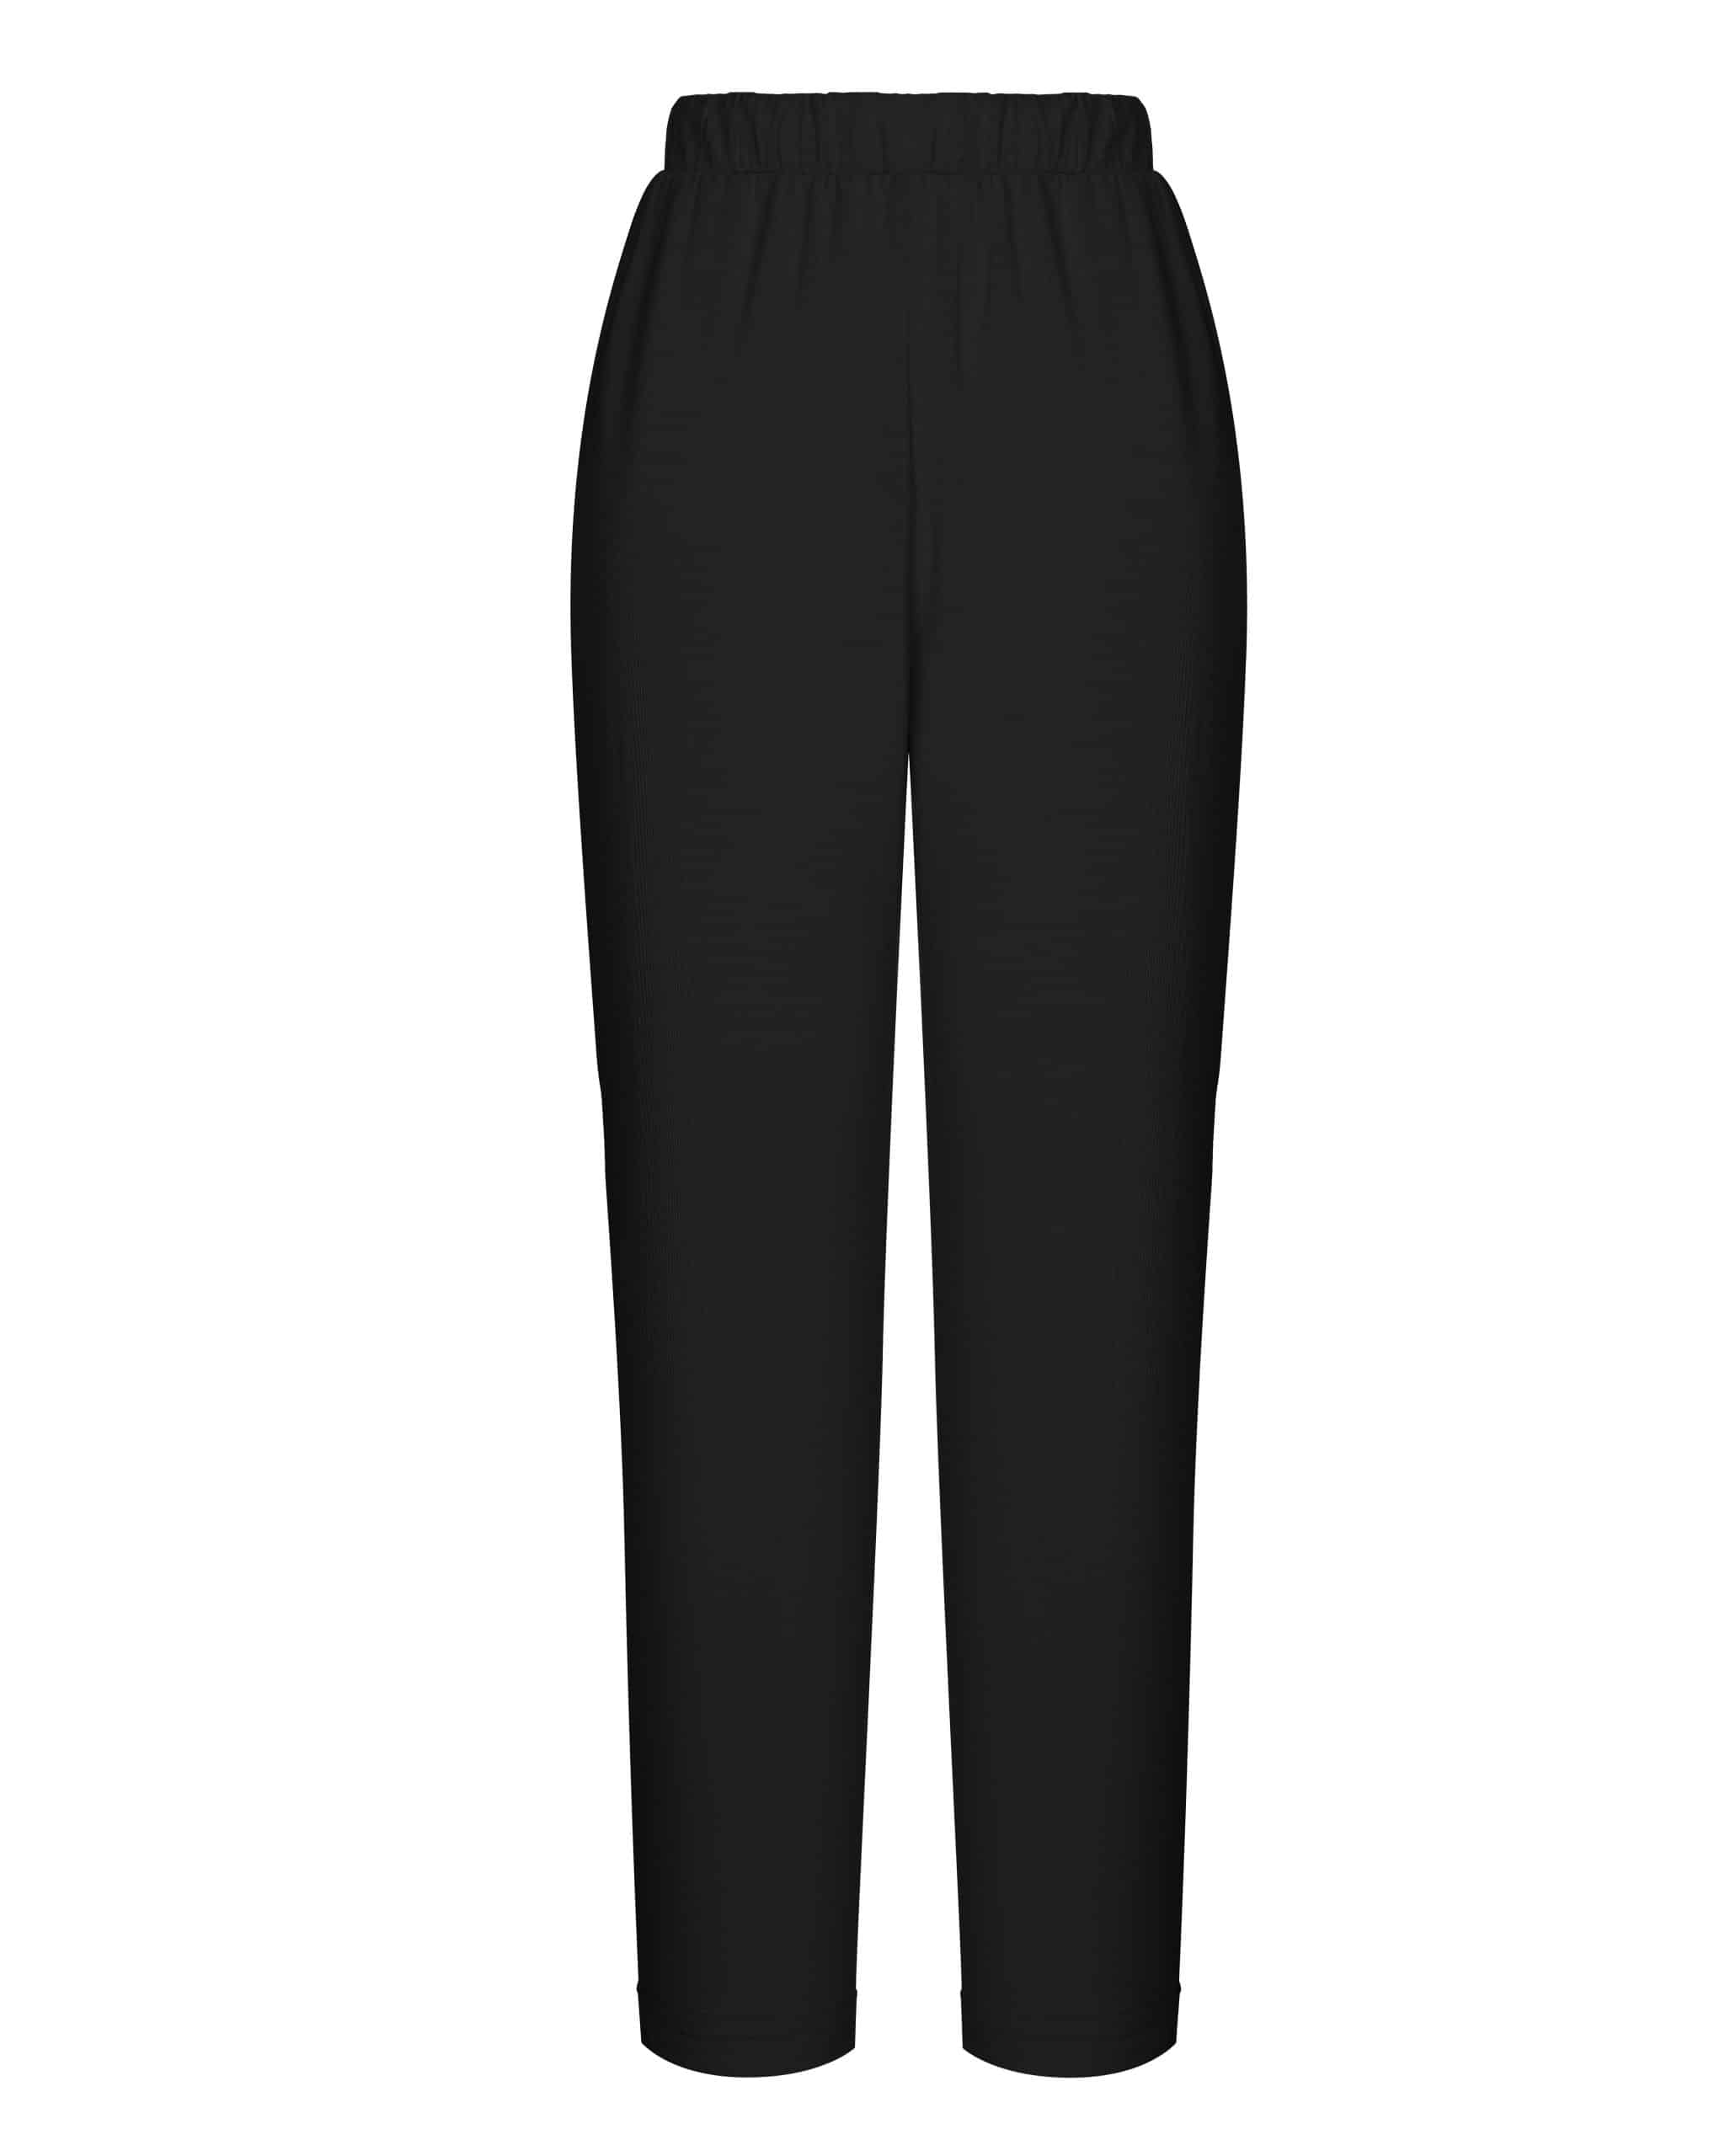 Tapered pants – belle you